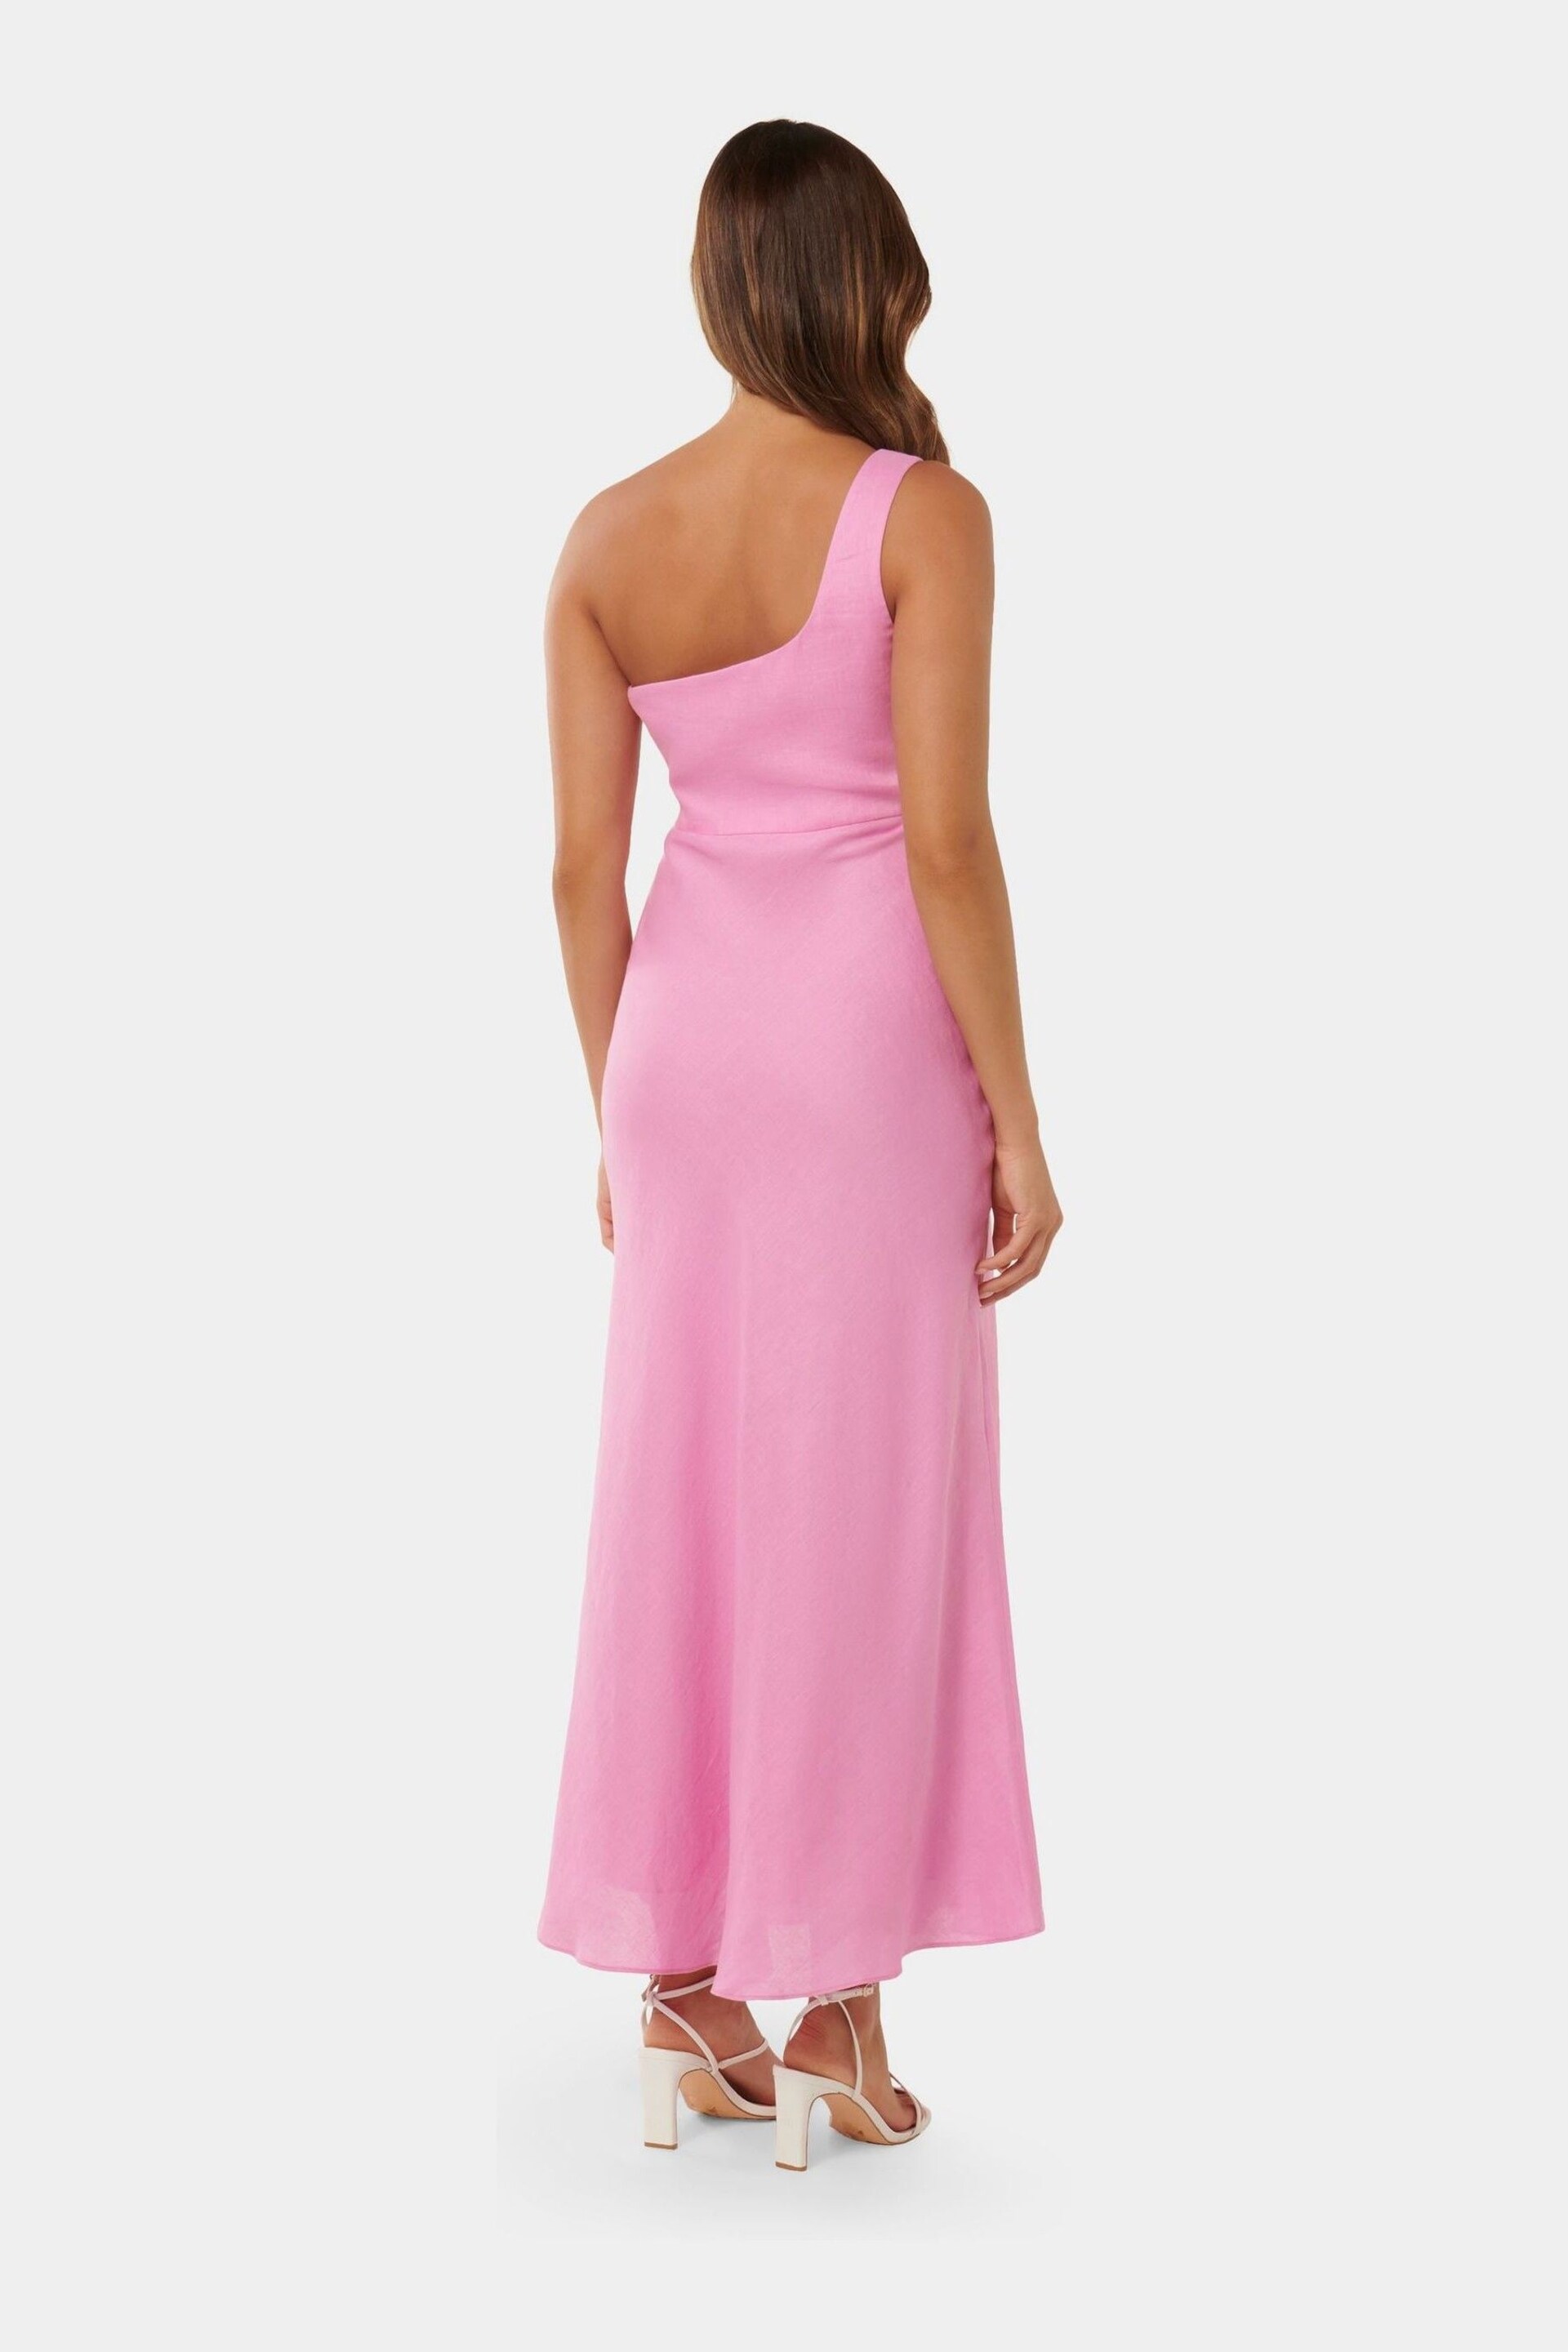 Forever New Pink Pure Linen Dalia One Shoulder Dress - Image 2 of 4